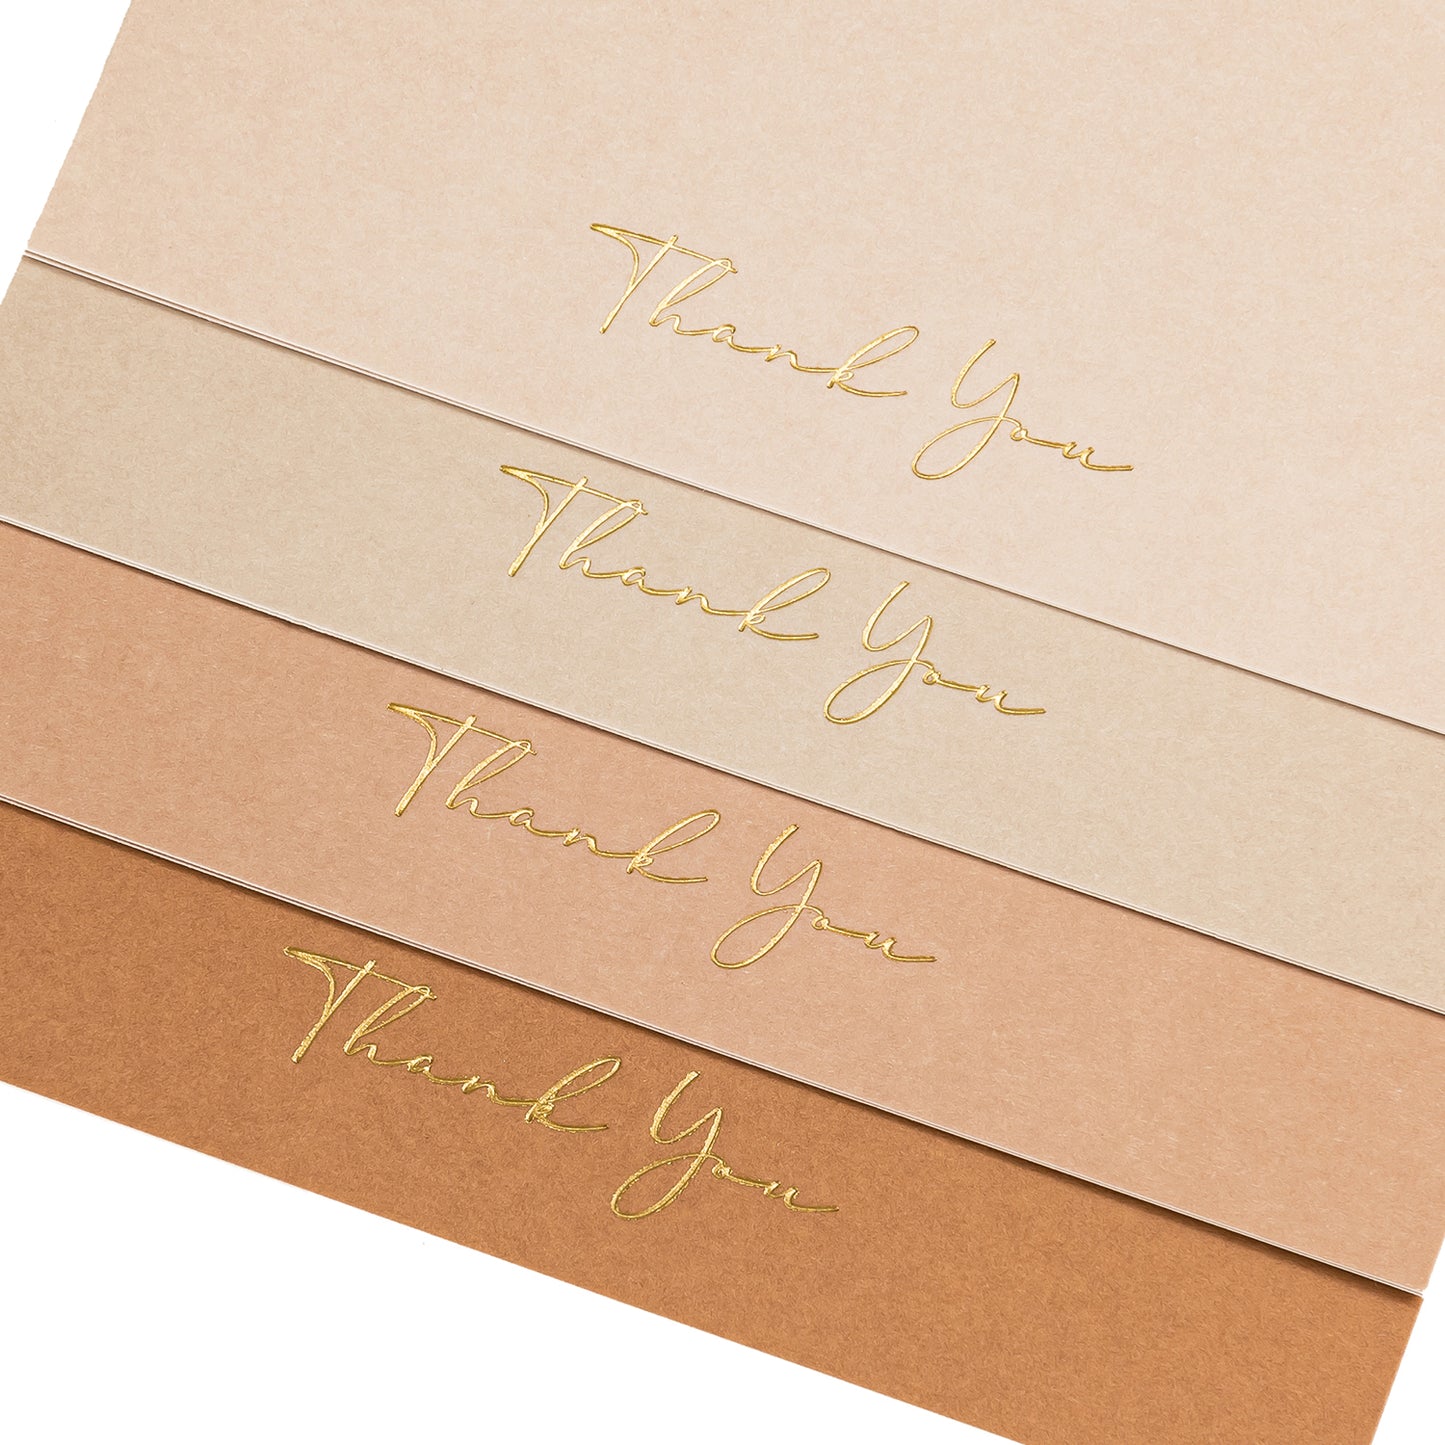 Crisky 50 Pack Thank You Greeting Cards With Envelope Neutral Series Thank You Cards for Wedding/Bridal Shower/Baby Shower/Business/Graduation